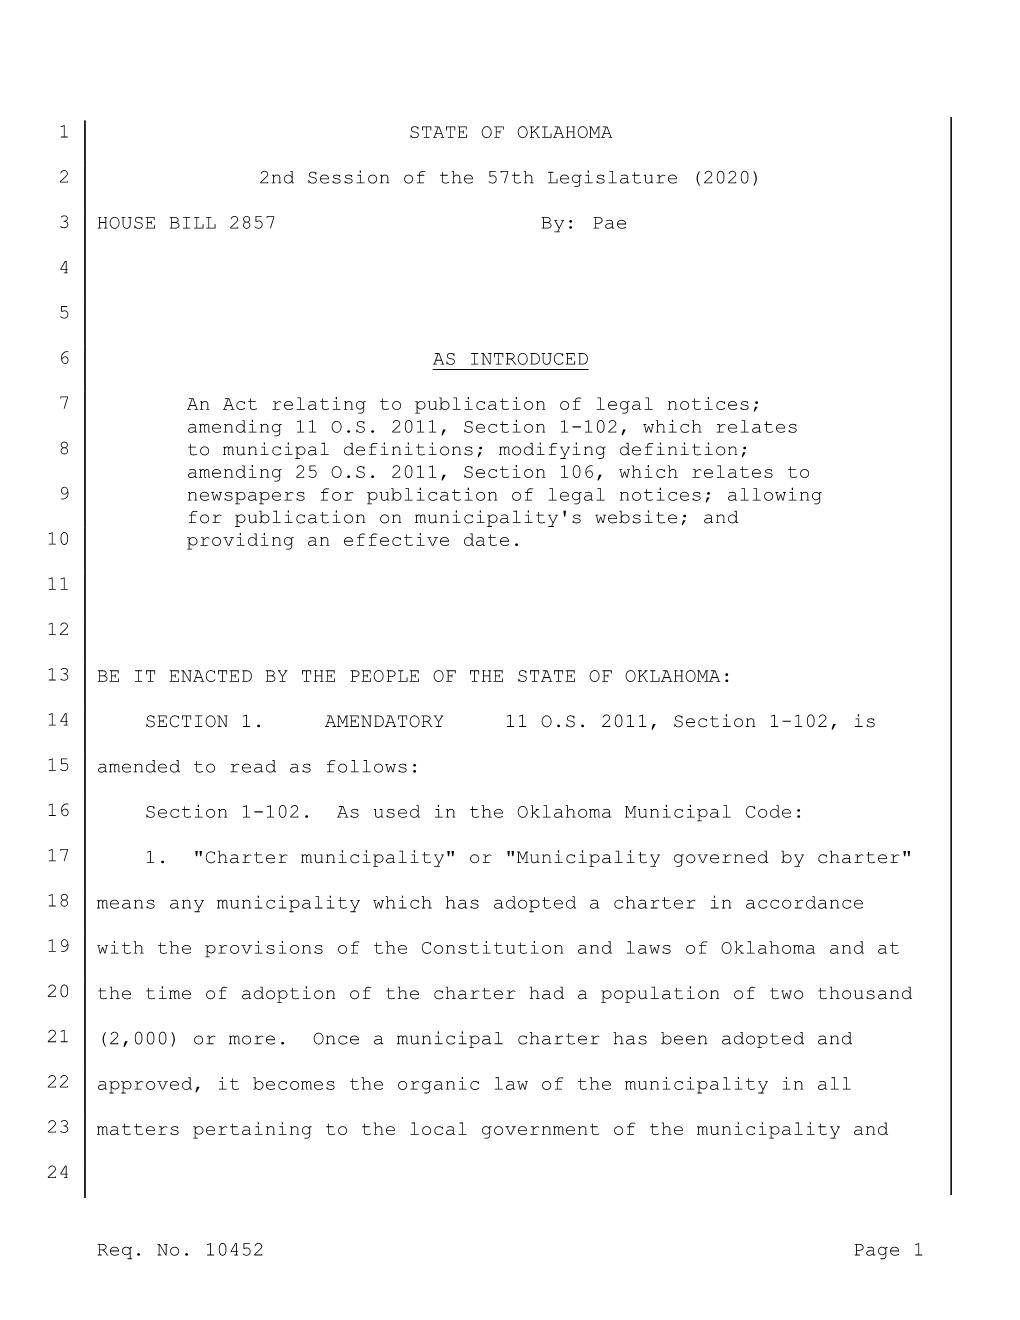 Req. No. 10452 Page 1 1 2 3 4 5 6 7 8 9 10 11 12 13 14 15 16 17 18 19 20 21 22 23 24 STATE of OKLAHOMA 2Nd Session of the 57Th L